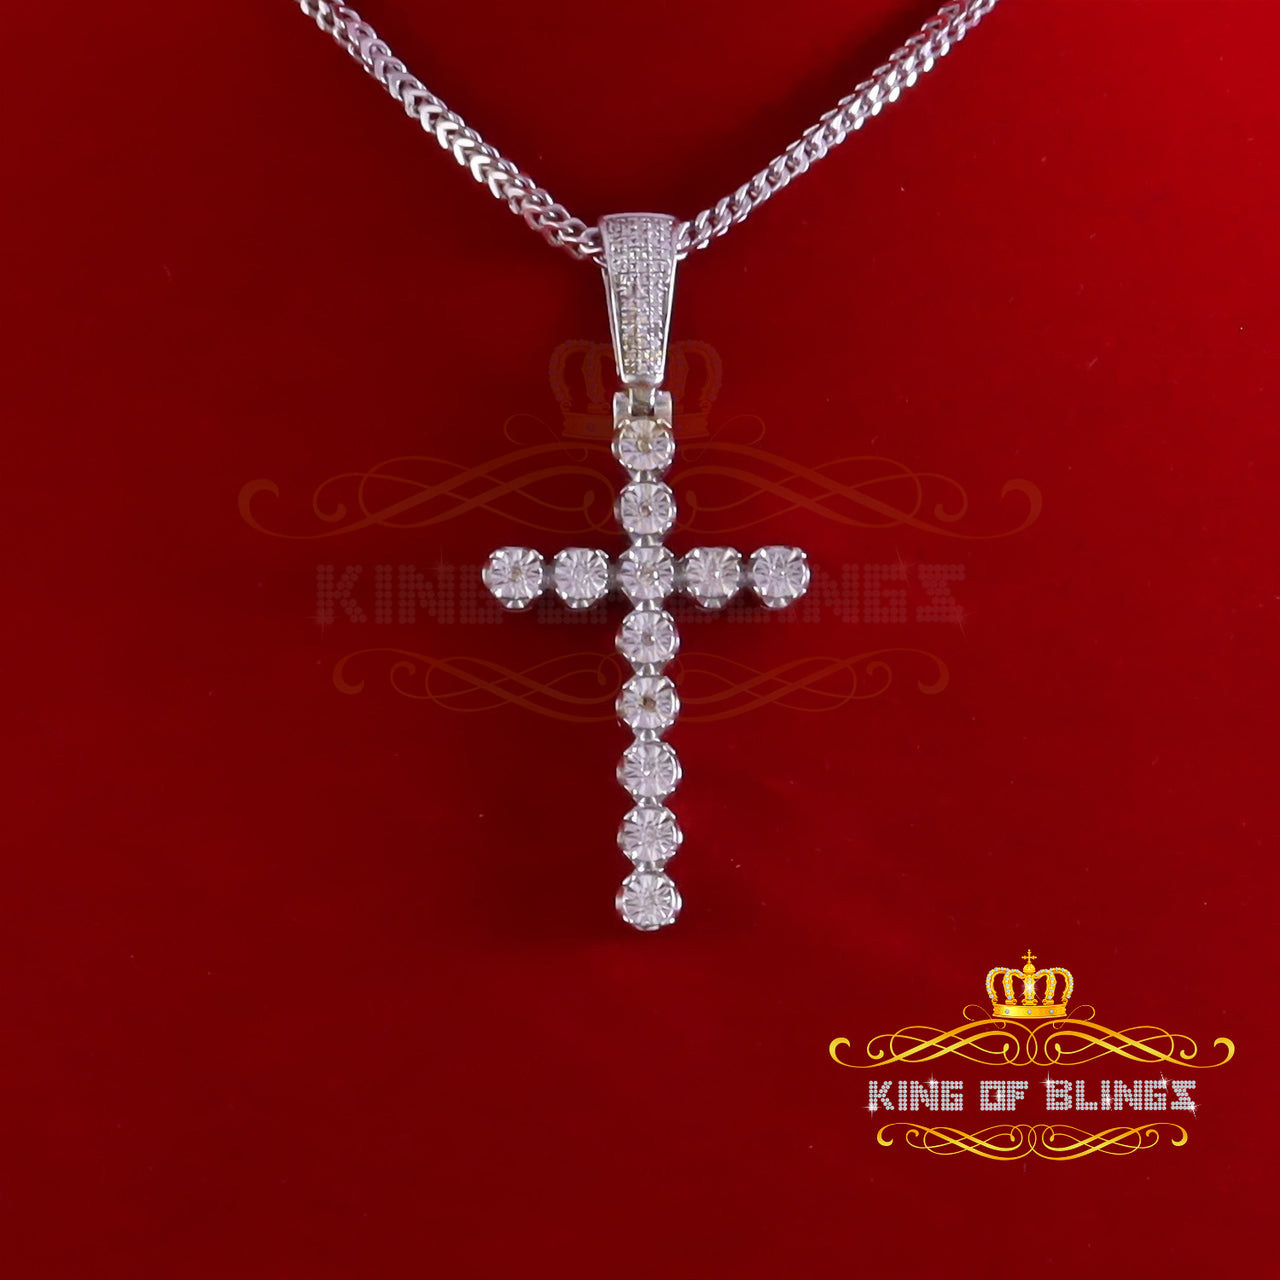 King Of Bling's 0.40CT Real Diamond Crystal Cross 925 Sterling Silver White Necklace Pendant